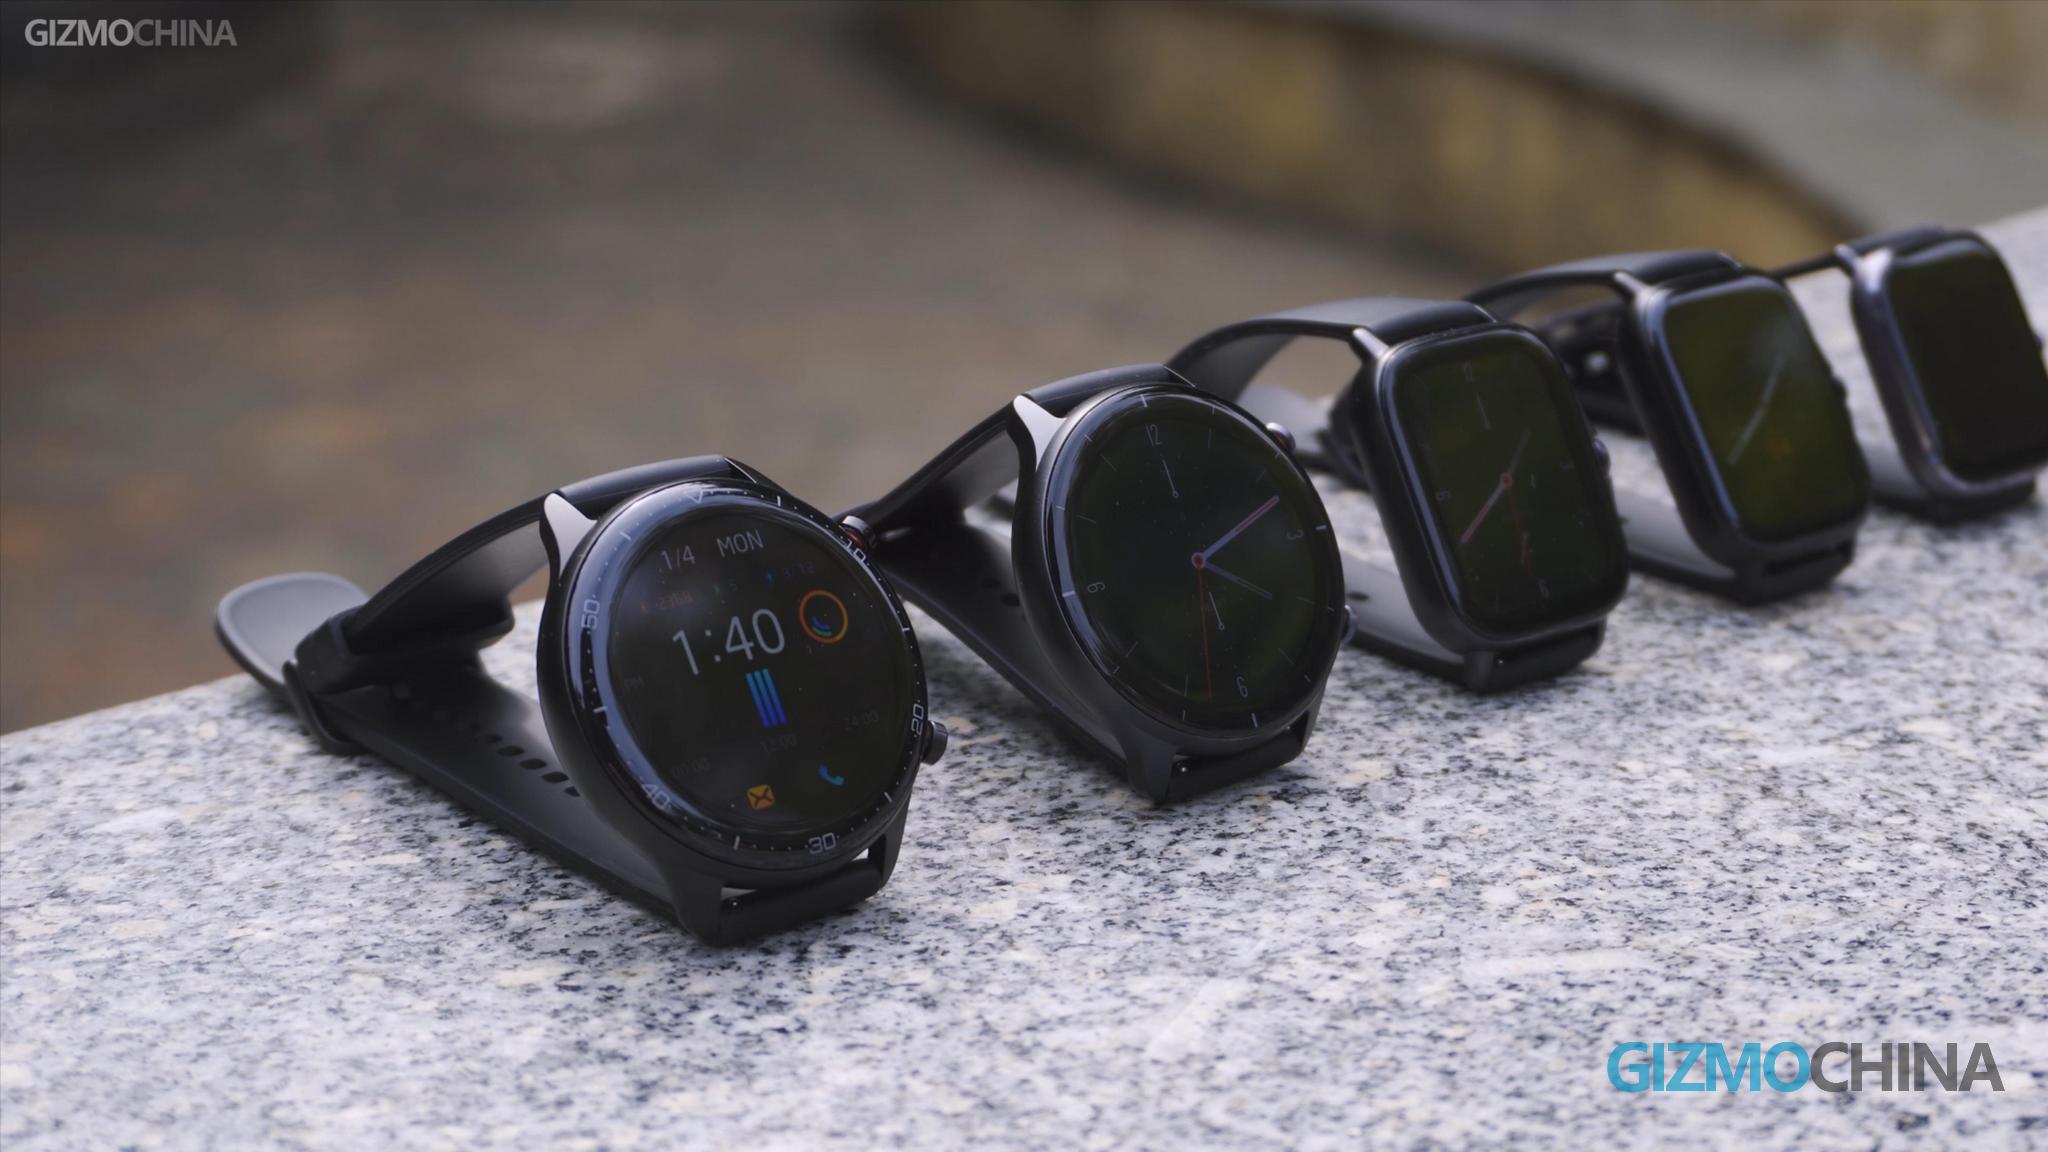 Amazfit GTR 2 LTE Smartwatch With eSIM Calling Function Launched